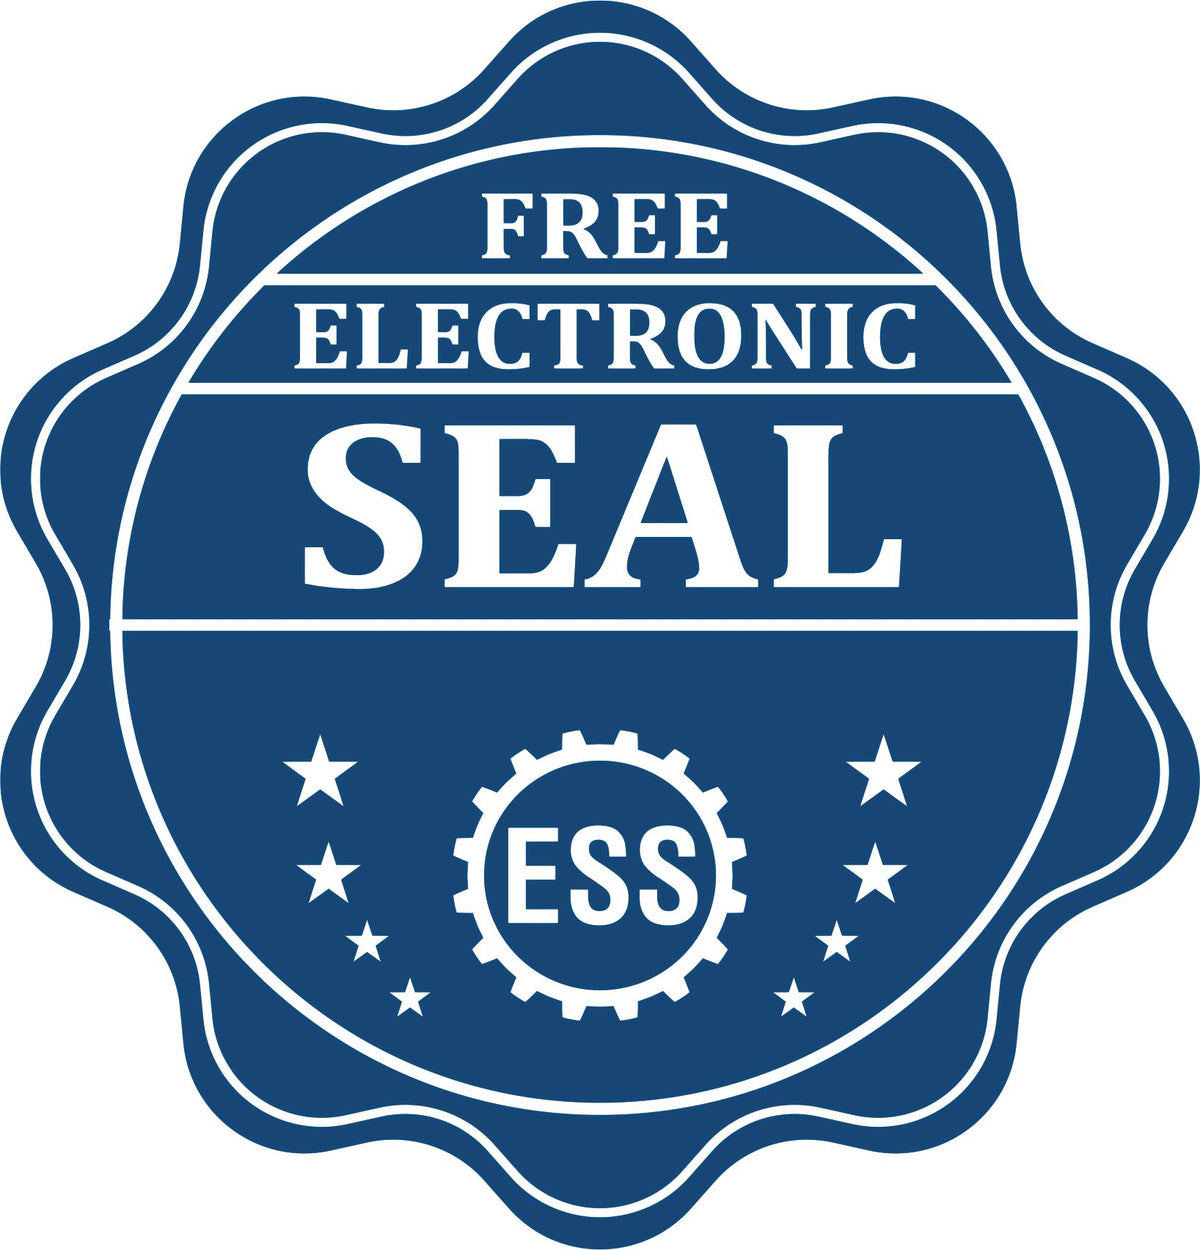 A badge showing a free electronic seal for the Mississippi Desk Surveyor Seal Embosser with stars and the ESS gear on the emblem.